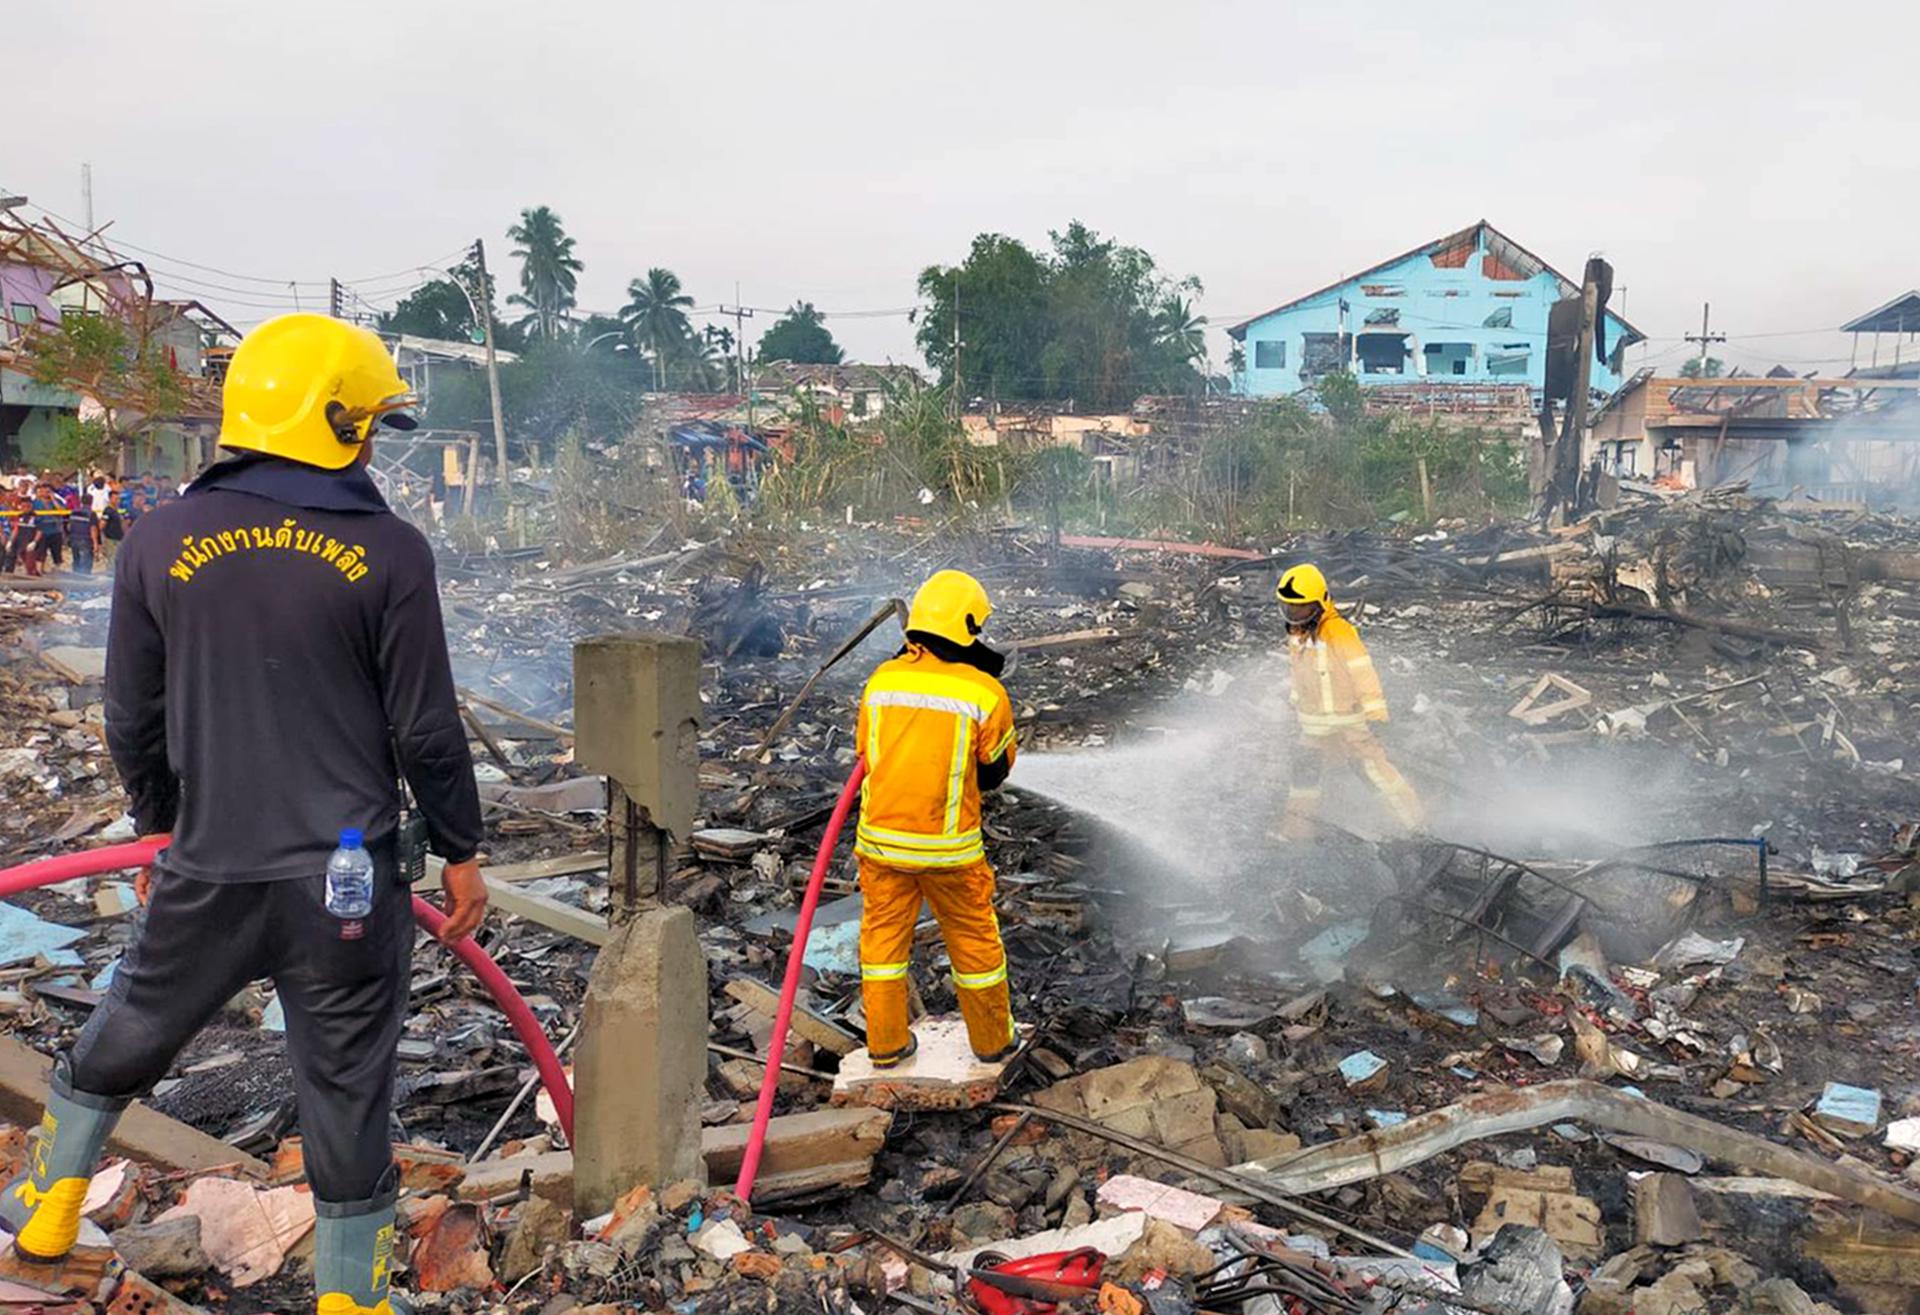 A handout photo made available by Pasemas rescue group shows Thai firefighters extinguishing a fire after an explosion at a firework warehouse in Sungai Kolok district, Narathiwat province, southern Thailand, 29 July 2023. EFE-EPA/PASEMAS RESCUE GROUP HANDOUT HANDOUT EDITORIAL USE ONLY/NO SALES